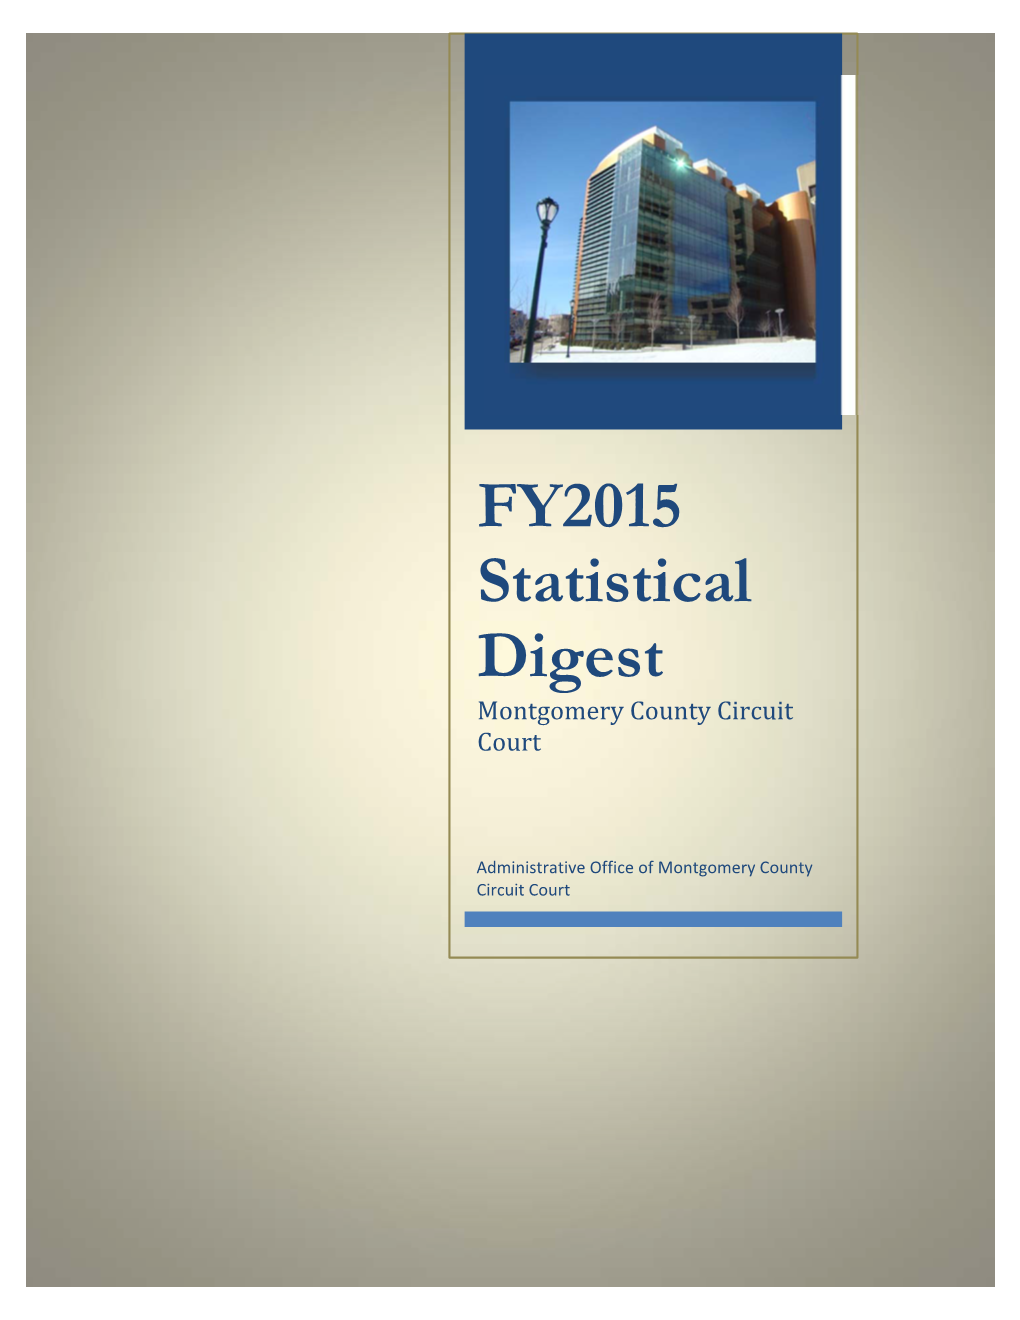 Montgomery County Circuit Court FY 2015 Annual Statistical Digest